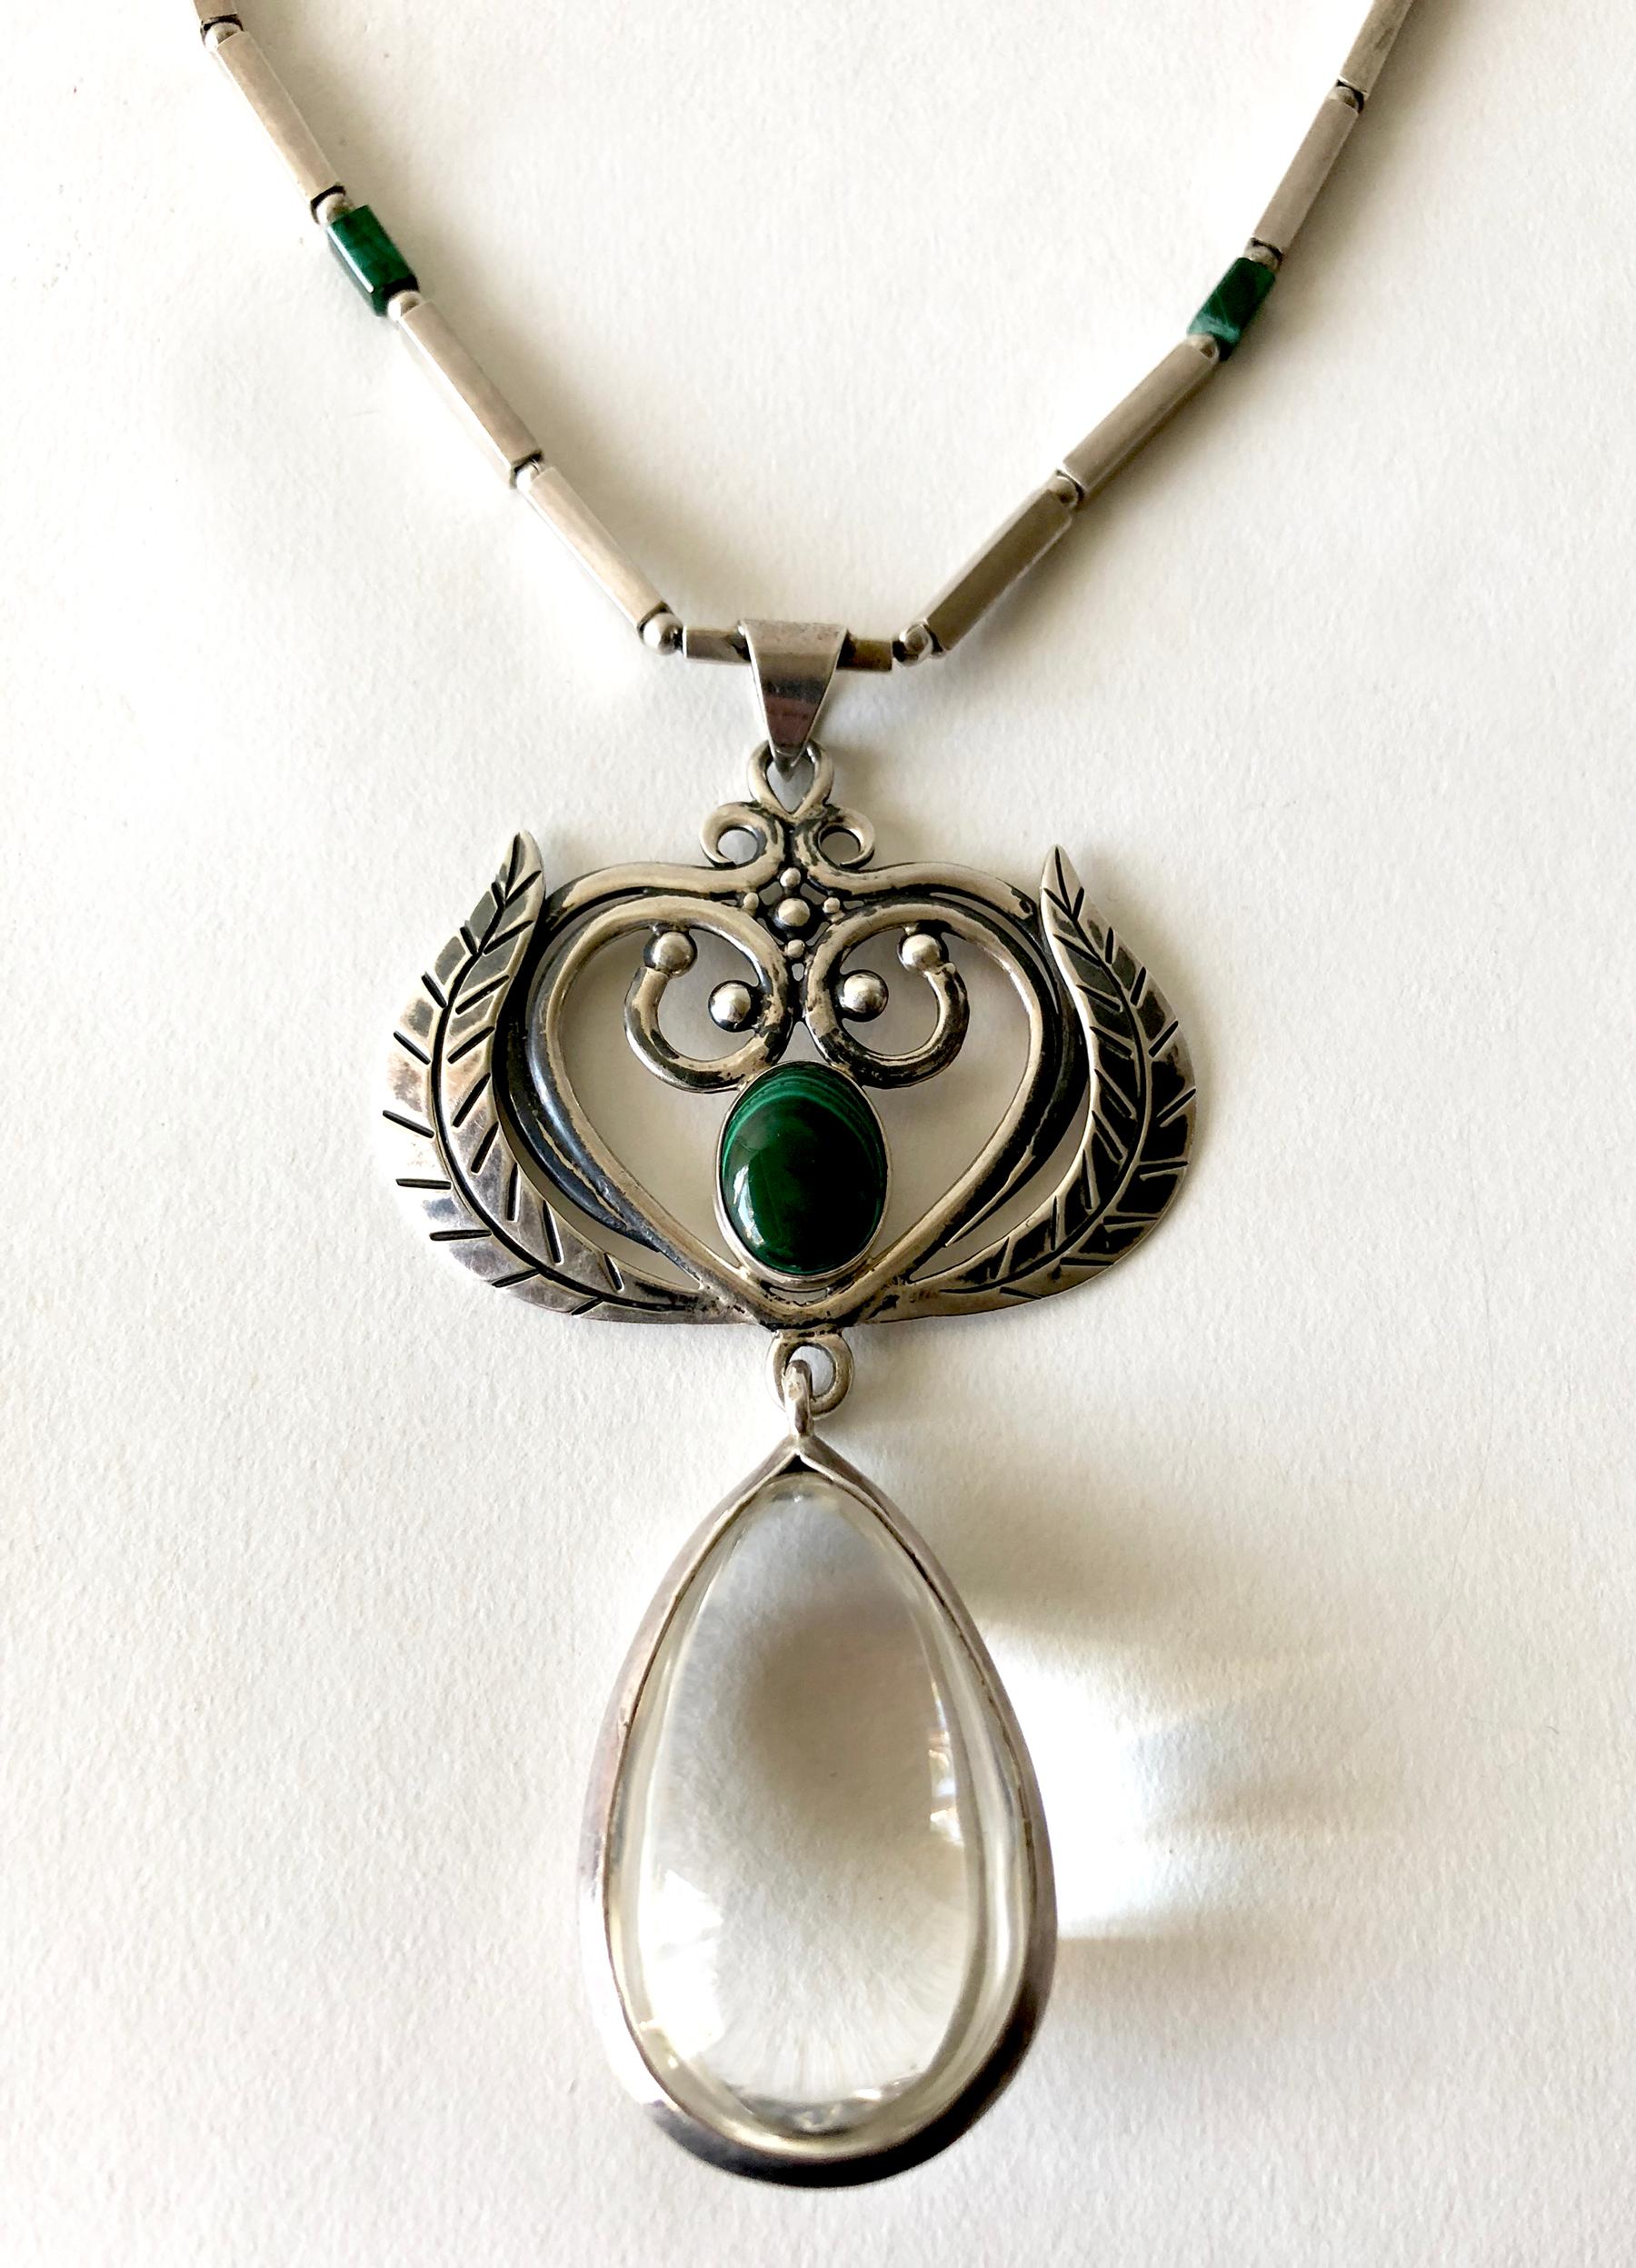 Rare, sterling silver necklace with malachite stone at pendant center and beads within the chain by Los Castillo of Taxco, Mexico.  Pendant also features a gorgeous large, bulbous, teardrop shaped rock crystal which measures 2